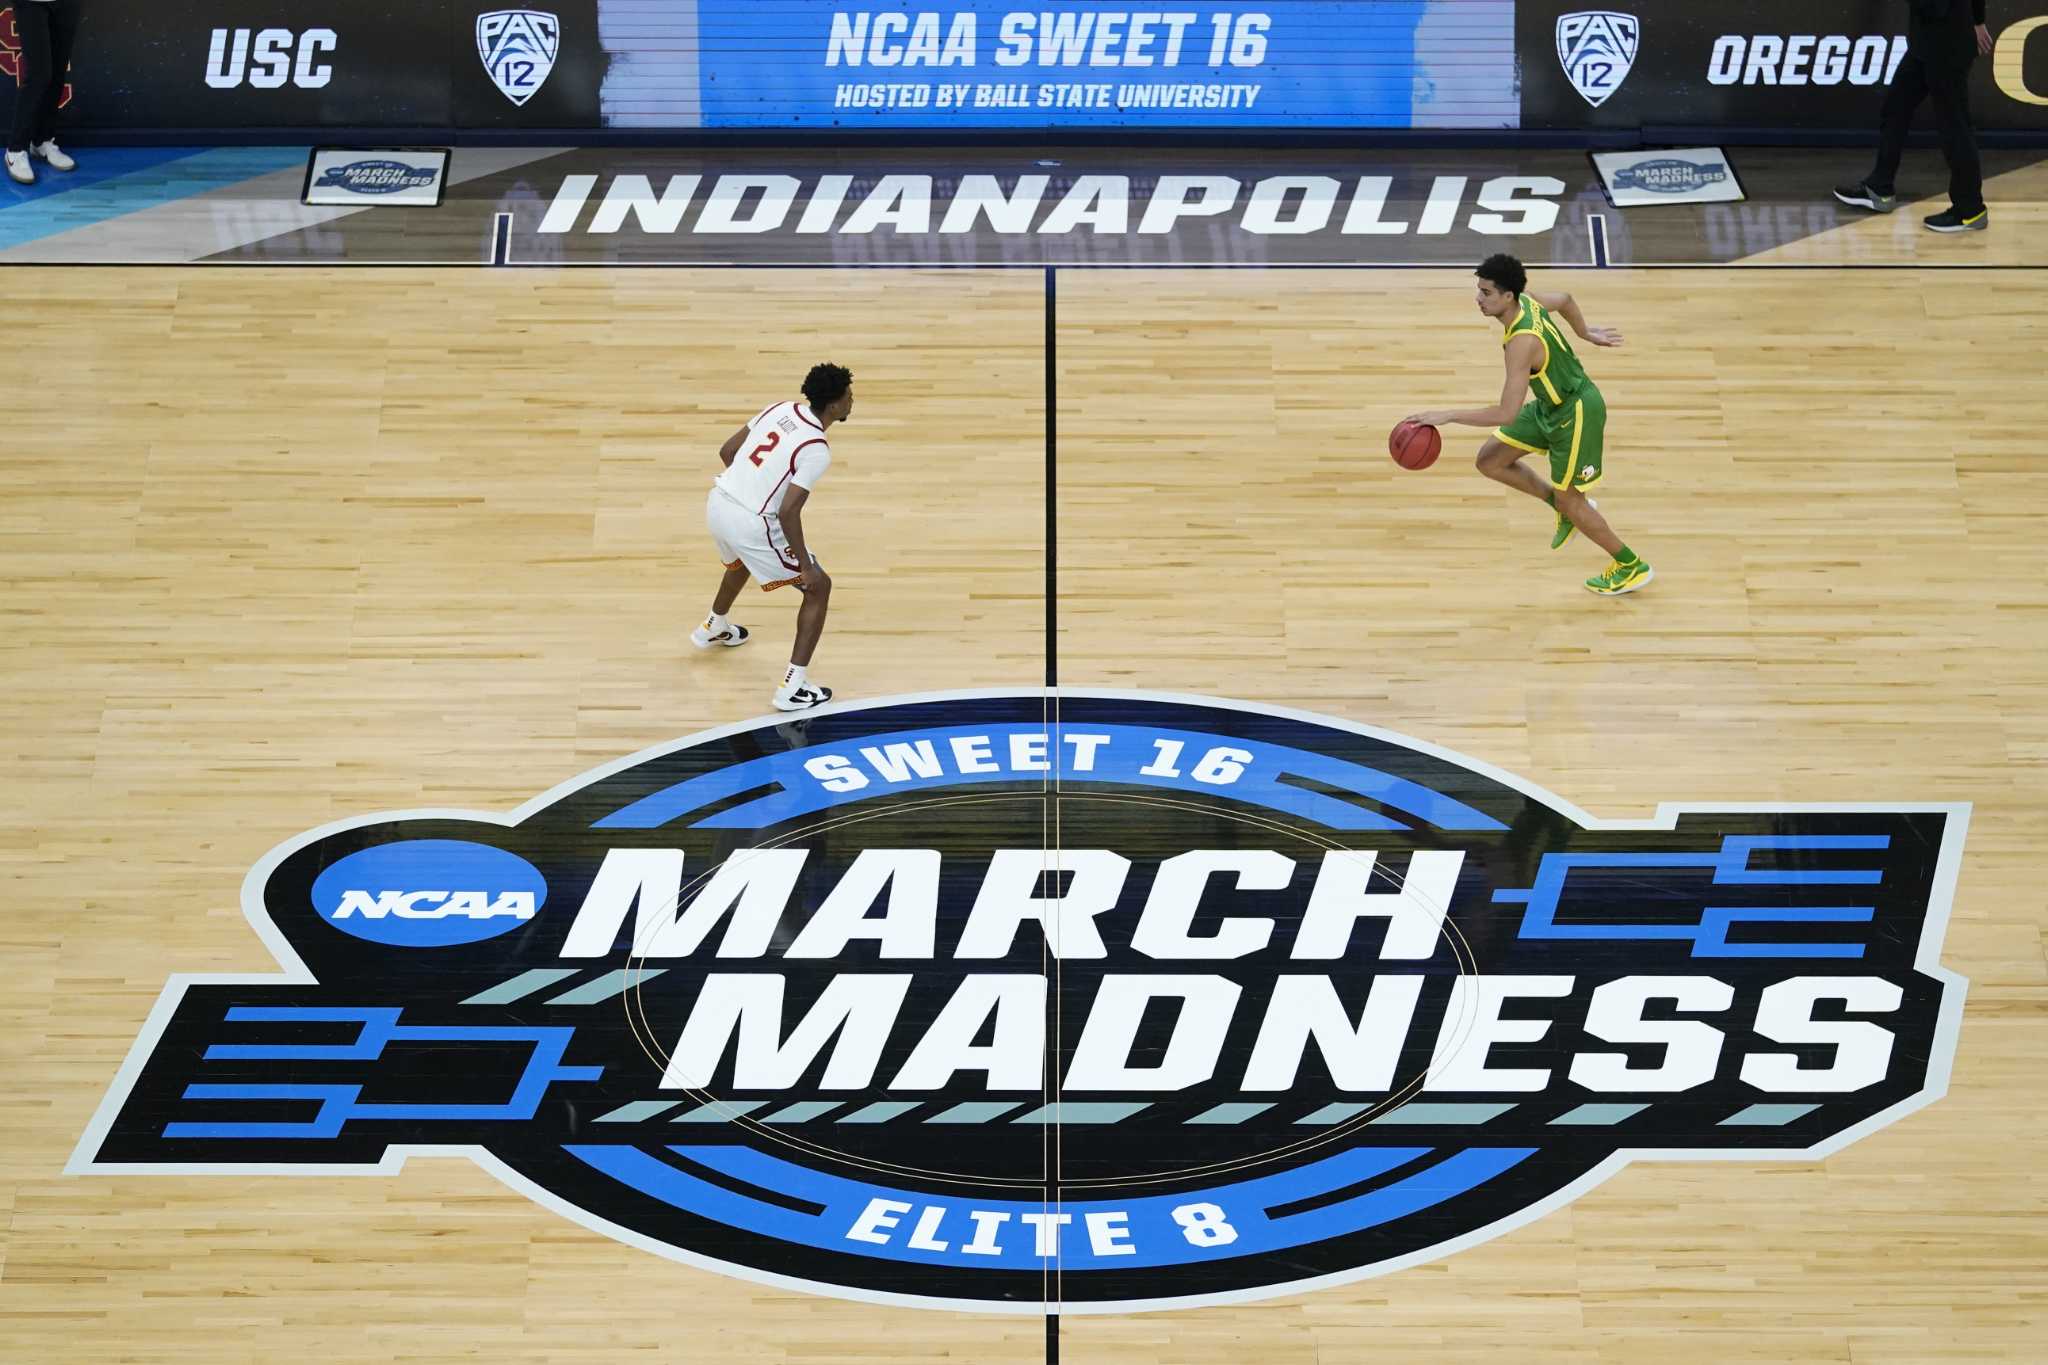 watch march madness online